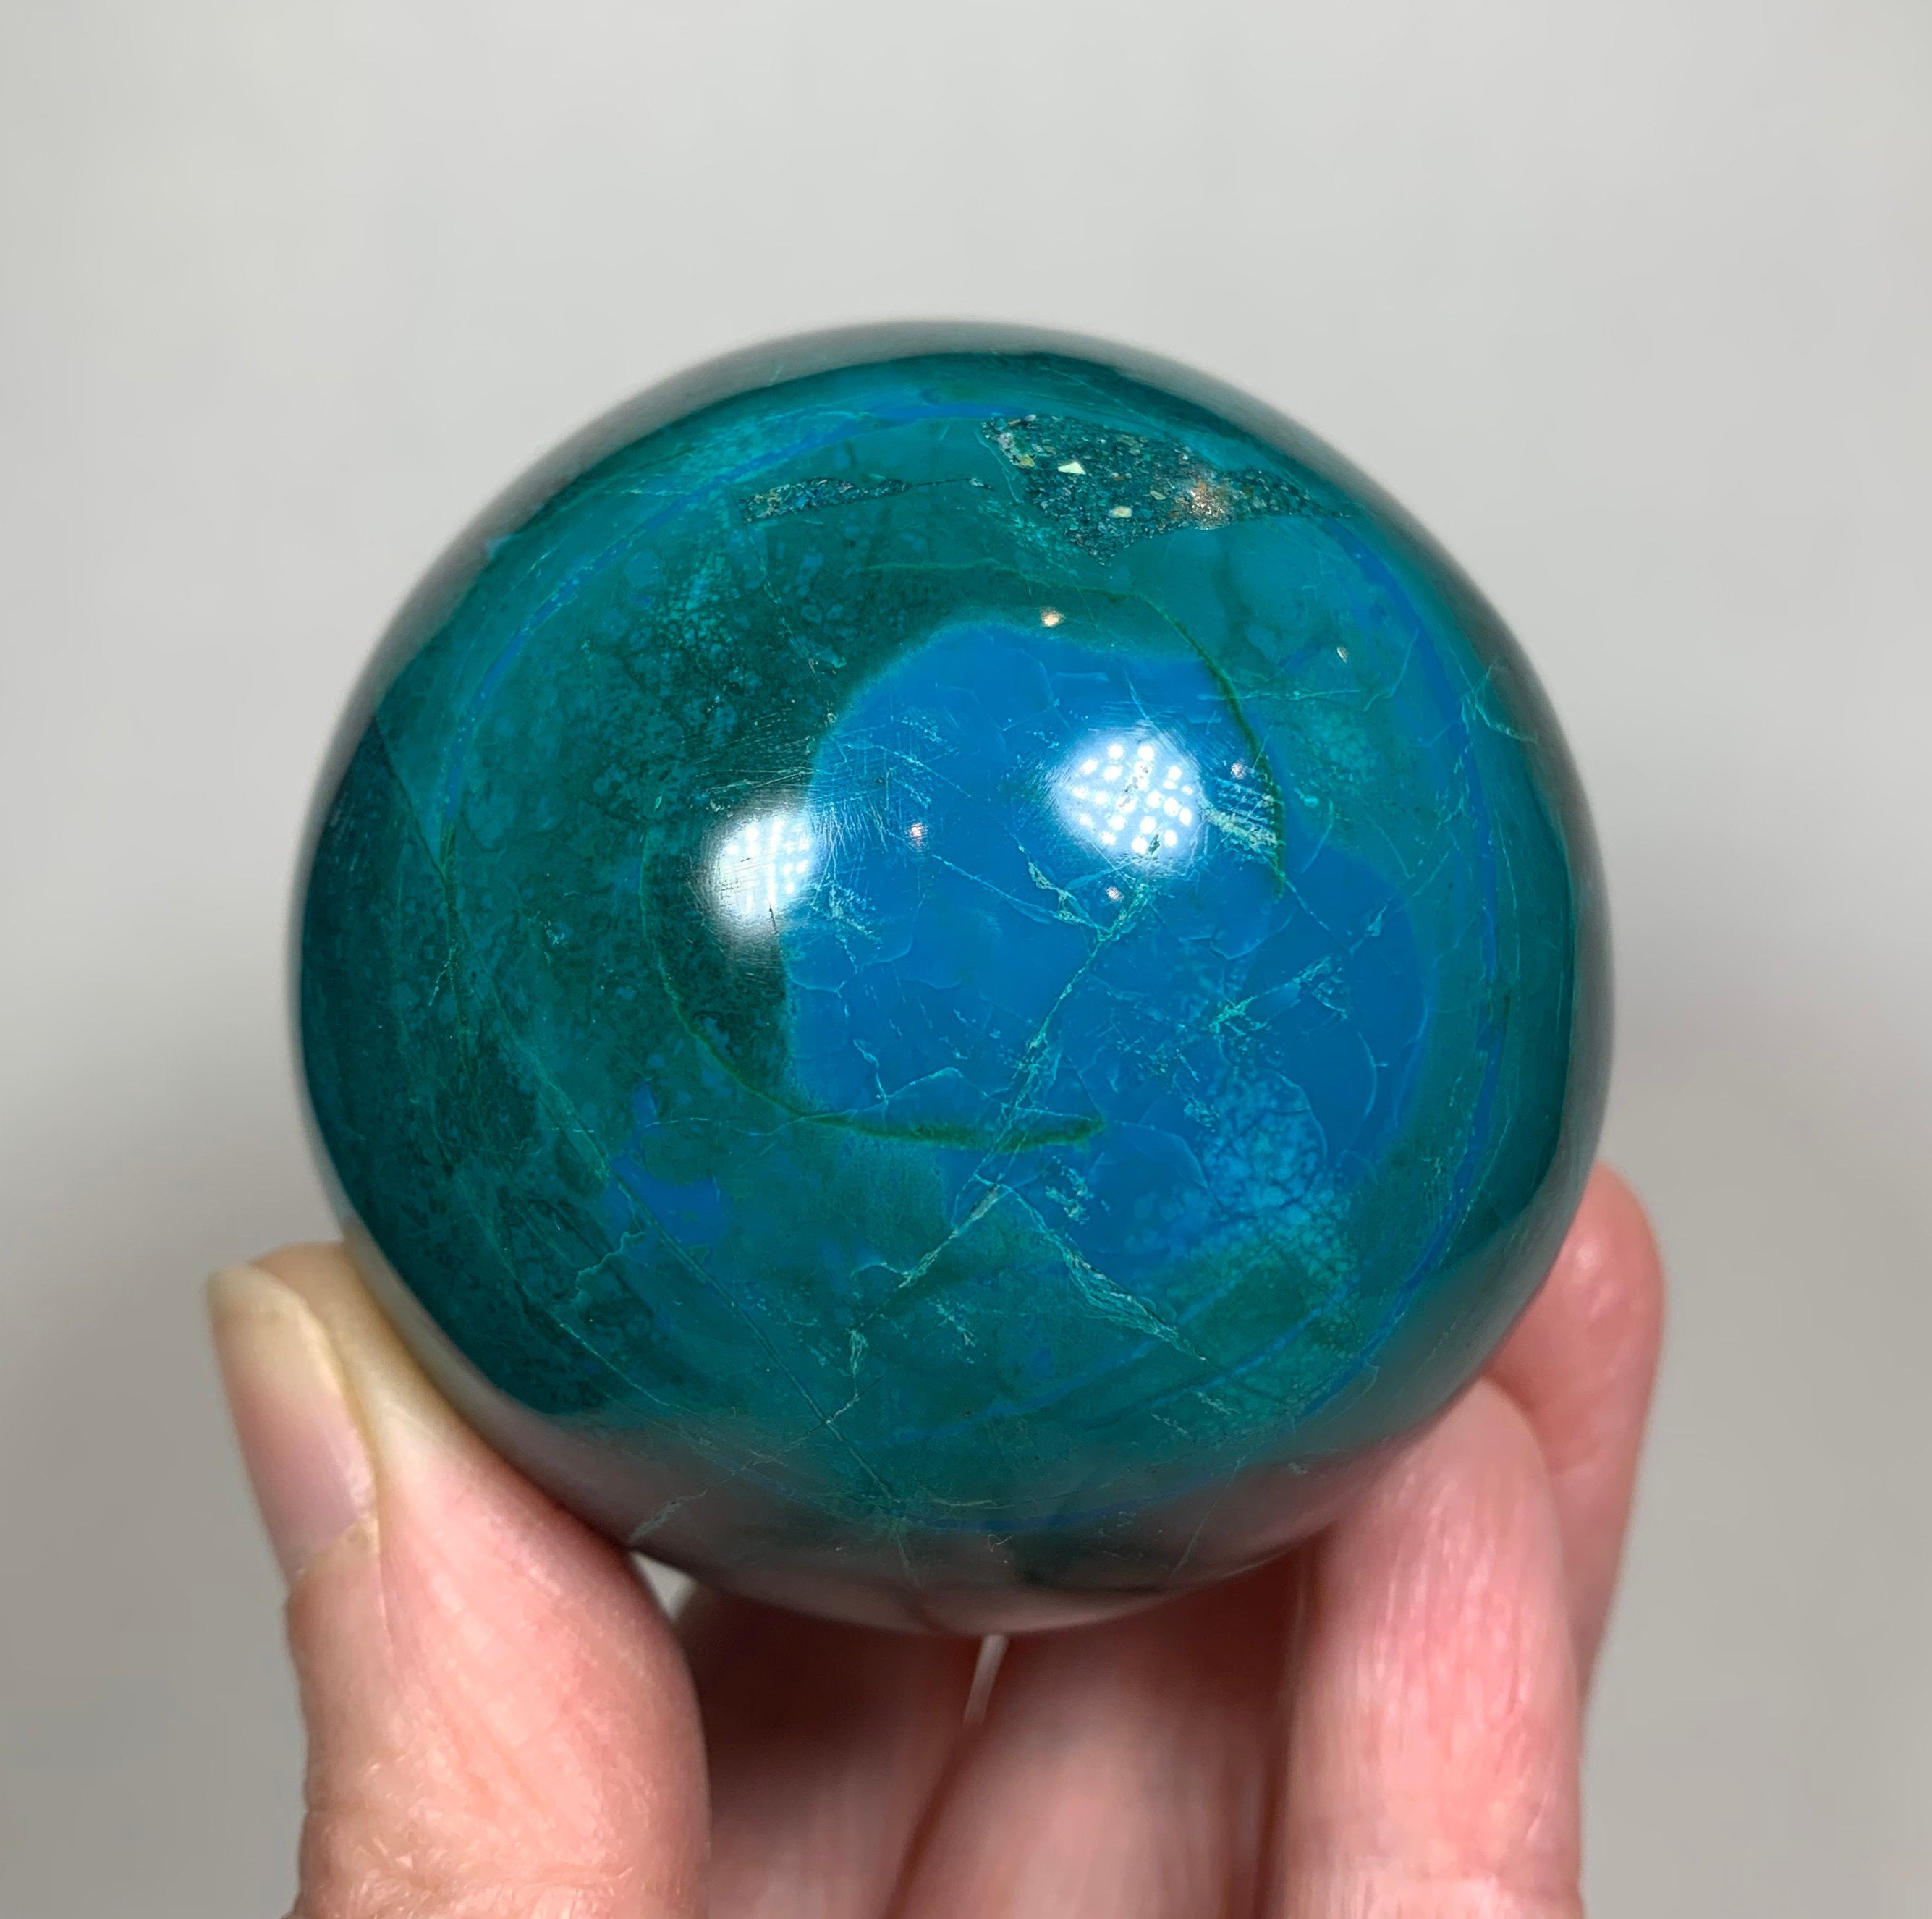 62mm Chrysocolla Crystal Sphere - Stone Ball - Natural - Polished - Meditation Crystal - Healing Stone- Display- Collectible- From Peru 386g